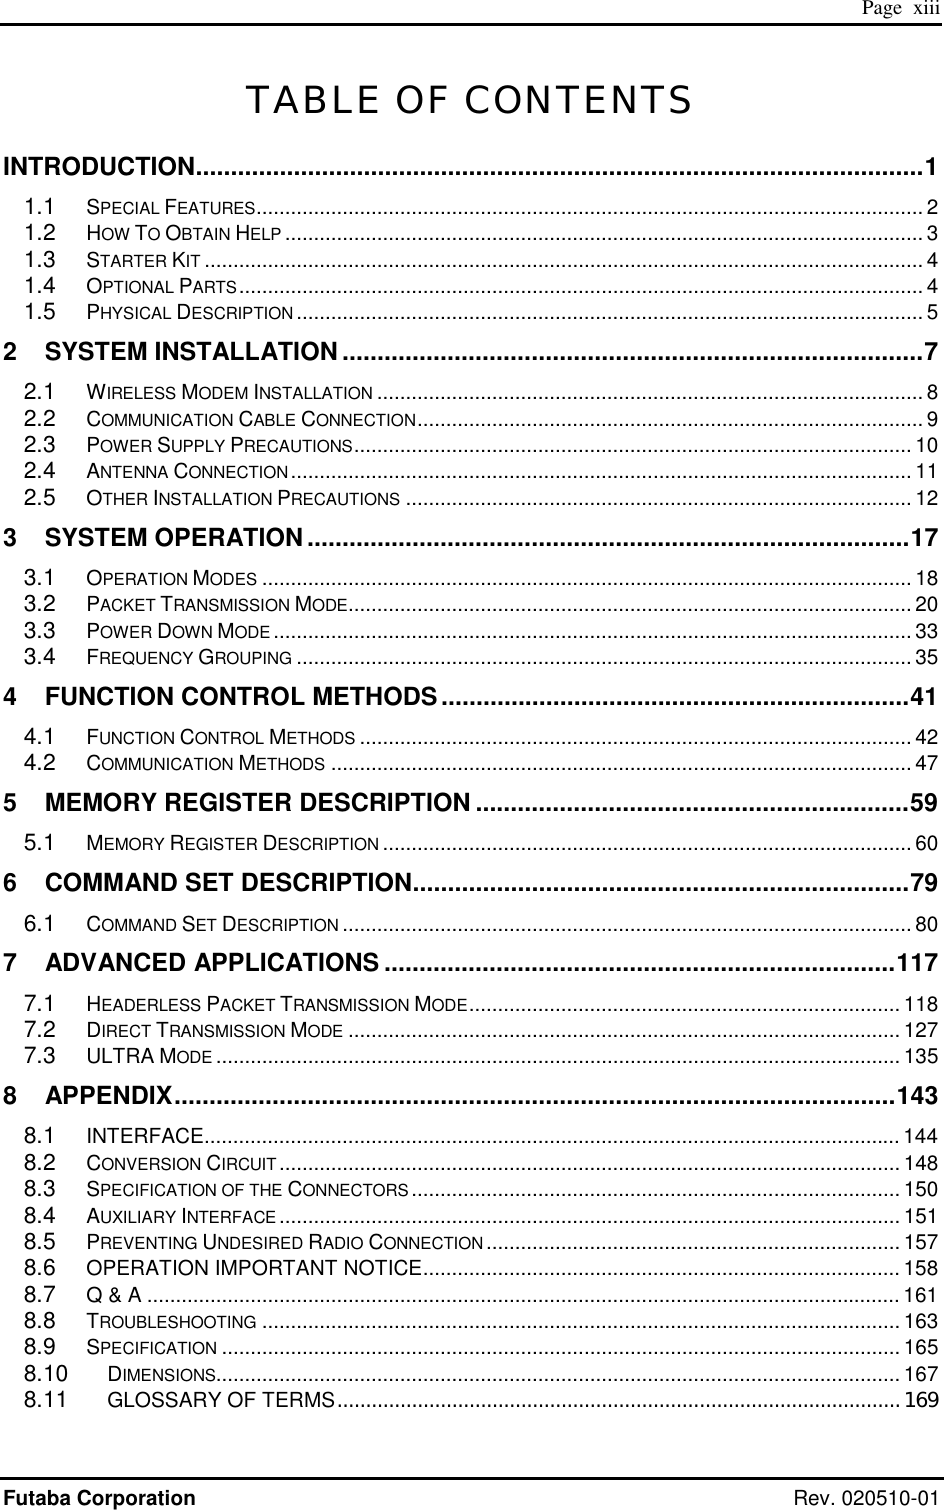  Page  xiii Futaba Corporation Rev. 020510-01 TABLE OF CONTENTS INTRODUCTION........................................................................................................1 1.1 SPECIAL FEATURES.................................................................................................................... 2 1.2 HOW TO OBTAIN HELP ............................................................................................................... 3 1.3 STARTER KIT ............................................................................................................................. 4 1.4 OPTIONAL PARTS....................................................................................................................... 4 1.5 PHYSICAL DESCRIPTION ............................................................................................................. 5 2 SYSTEM INSTALLATION ...................................................................................7 2.1 WIRELESS MODEM INSTALLATION ............................................................................................... 8 2.2 COMMUNICATION CABLE CONNECTION........................................................................................ 9 2.3 POWER SUPPLY PRECAUTIONS................................................................................................. 10 2.4 ANTENNA CONNECTION............................................................................................................ 11 2.5 OTHER INSTALLATION PRECAUTIONS ........................................................................................ 12 3 SYSTEM OPERATION ......................................................................................17 3.1 OPERATION MODES ................................................................................................................. 18 3.2 PACKET TRANSMISSION MODE.................................................................................................. 20 3.3 POWER DOWN MODE ............................................................................................................... 33 3.4 FREQUENCY GROUPING ........................................................................................................... 35 4 FUNCTION CONTROL METHODS...................................................................41 4.1 FUNCTION CONTROL METHODS ................................................................................................ 42 4.2 COMMUNICATION METHODS ..................................................................................................... 47 5 MEMORY REGISTER DESCRIPTION ..............................................................59 5.1 MEMORY REGISTER DESCRIPTION ............................................................................................ 60 6 COMMAND SET DESCRIPTION.......................................................................79 6.1 COMMAND SET DESCRIPTION ................................................................................................... 80 7 ADVANCED APPLICATIONS .........................................................................117 7.1 HEADERLESS PACKET TRANSMISSION MODE........................................................................... 118 7.2 DIRECT TRANSMISSION MODE ................................................................................................ 127 7.3 ULTRA MODE ....................................................................................................................... 135 8 APPENDIX.......................................................................................................143 8.1 INTERFACE......................................................................................................................... 144 8.2 CONVERSION CIRCUIT............................................................................................................ 148 8.3 SPECIFICATION OF THE CONNECTORS..................................................................................... 150 8.4 AUXILIARY INTERFACE ............................................................................................................ 151 8.5 PREVENTING UNDESIRED RADIO CONNECTION........................................................................ 157 8.6 OPERATION IMPORTANT NOTICE................................................................................... 158 8.7 Q &amp; A ................................................................................................................................... 161 8.8 TROUBLESHOOTING ............................................................................................................... 163 8.9 SPECIFICATION ...................................................................................................................... 165 8.10 DIMENSIONS....................................................................................................................... 167 8.11 GLOSSARY OF TERMS..................................................................................................169 